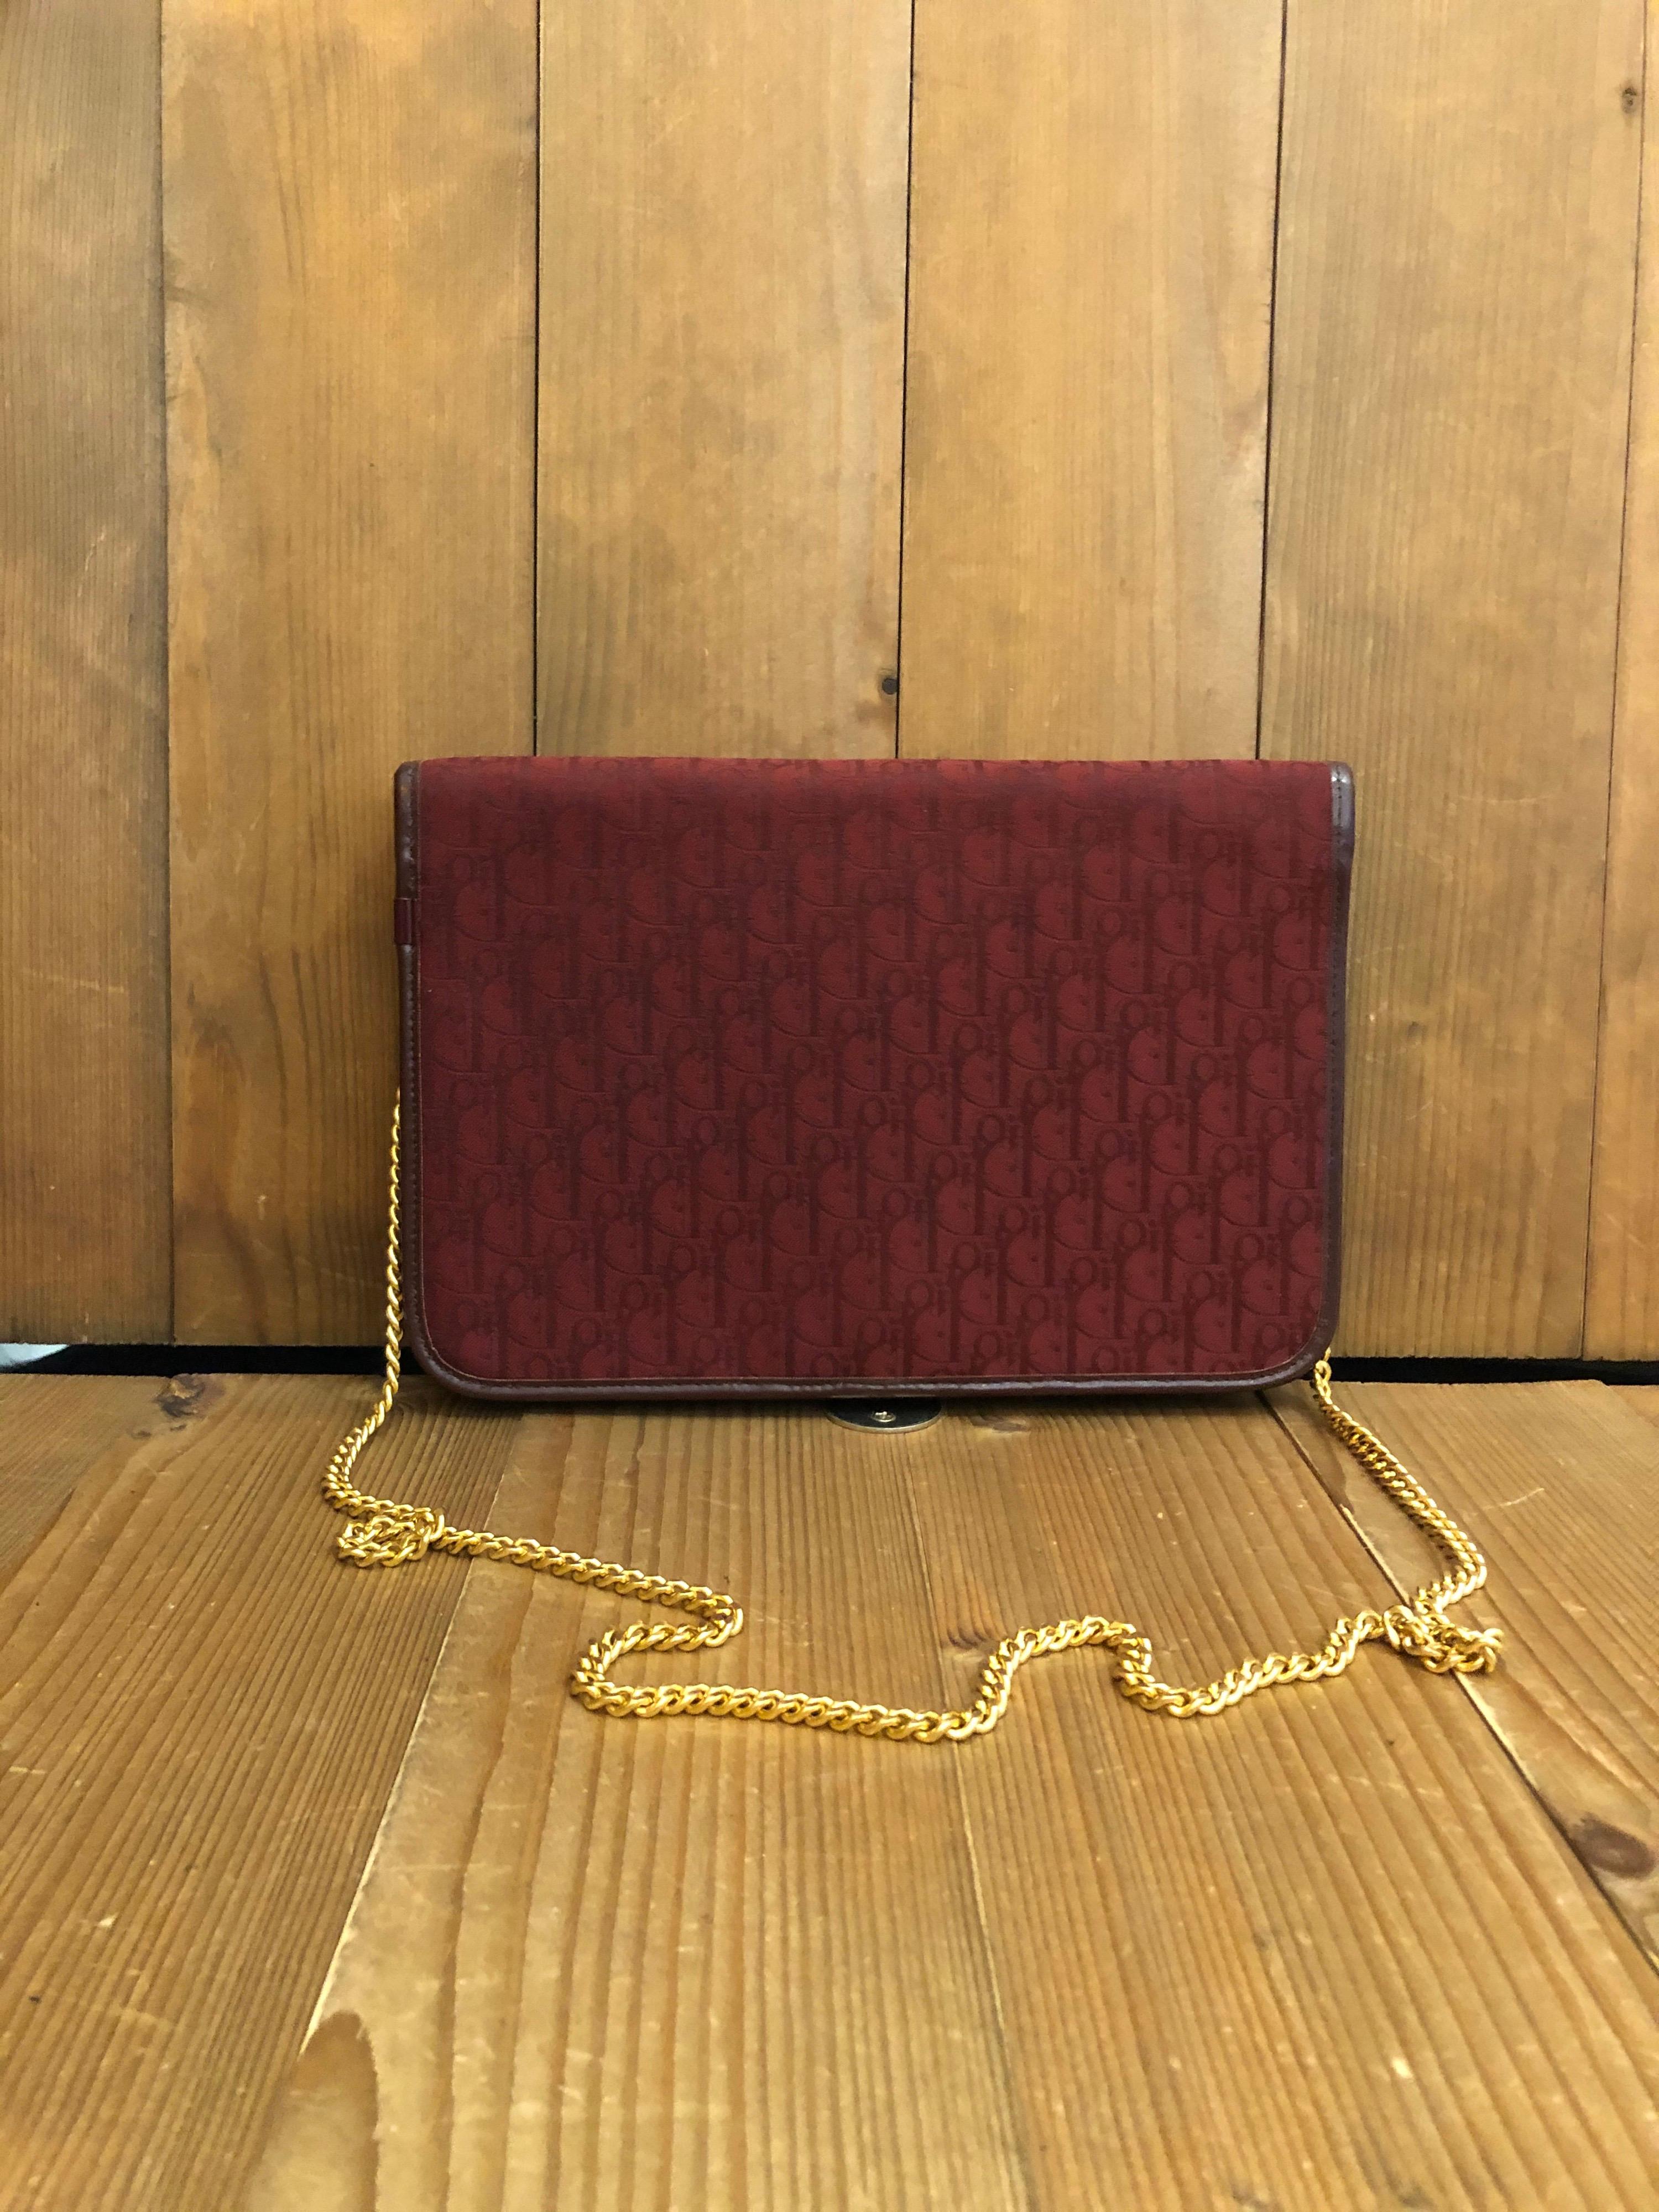 Christian Dior chain bag in burgundy Dior trotter jacquard featuring a huge CD logo on the front. Interior lined with burgundy leather. Made in France. Measurement 24.5 x 15.9 x 2.5cm Chain drop 39cm

Condition: Minor signs of use. Generally in very